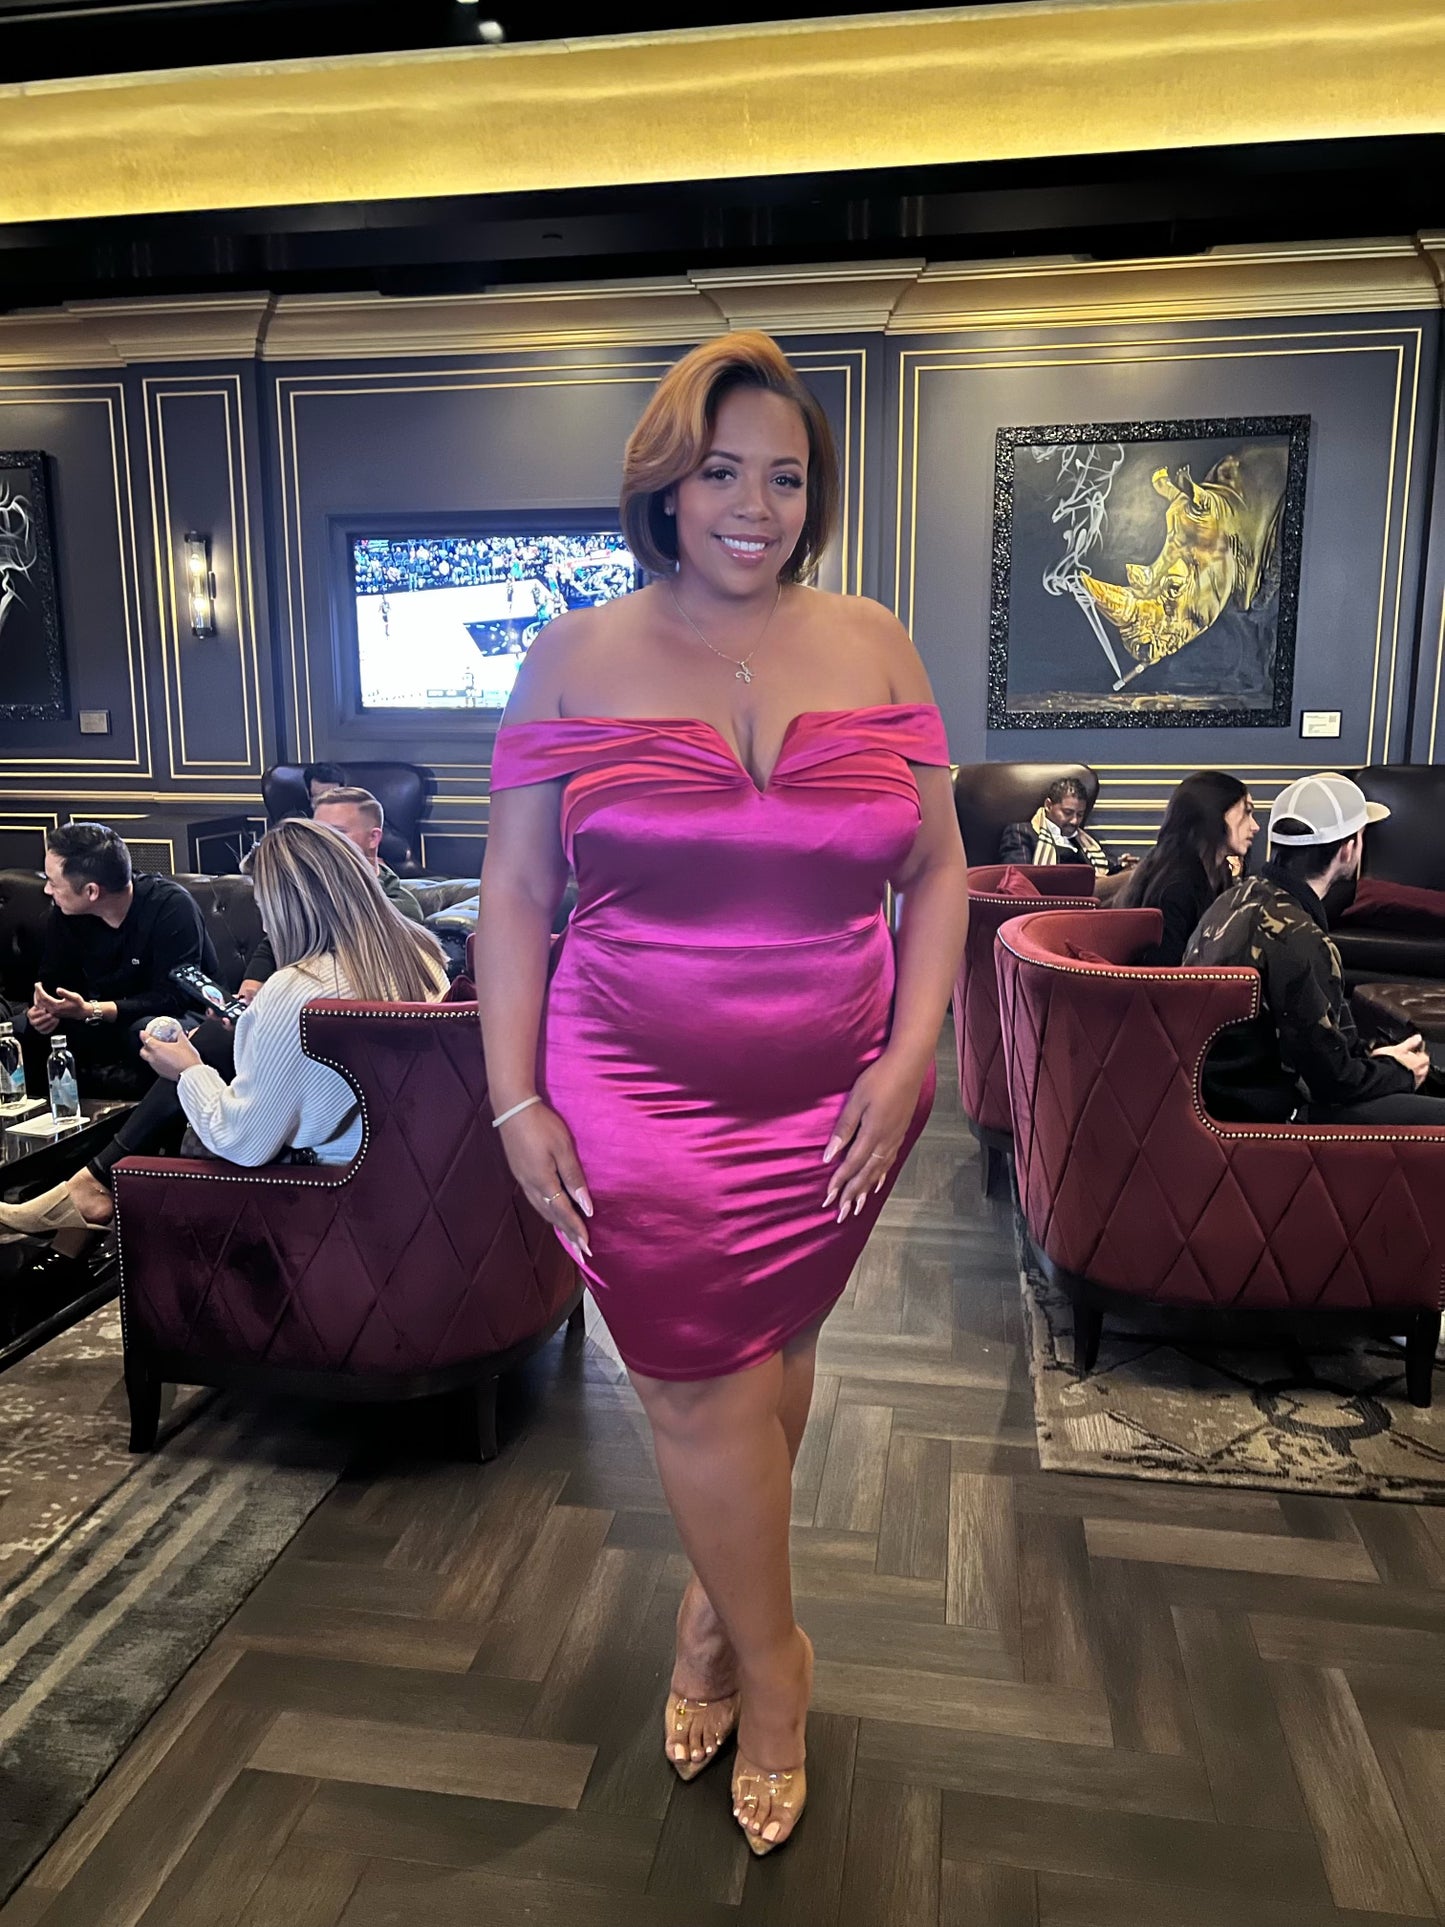 THE PLUS SIZE SATIN DRESS COMES IN Pink,Blue,Black